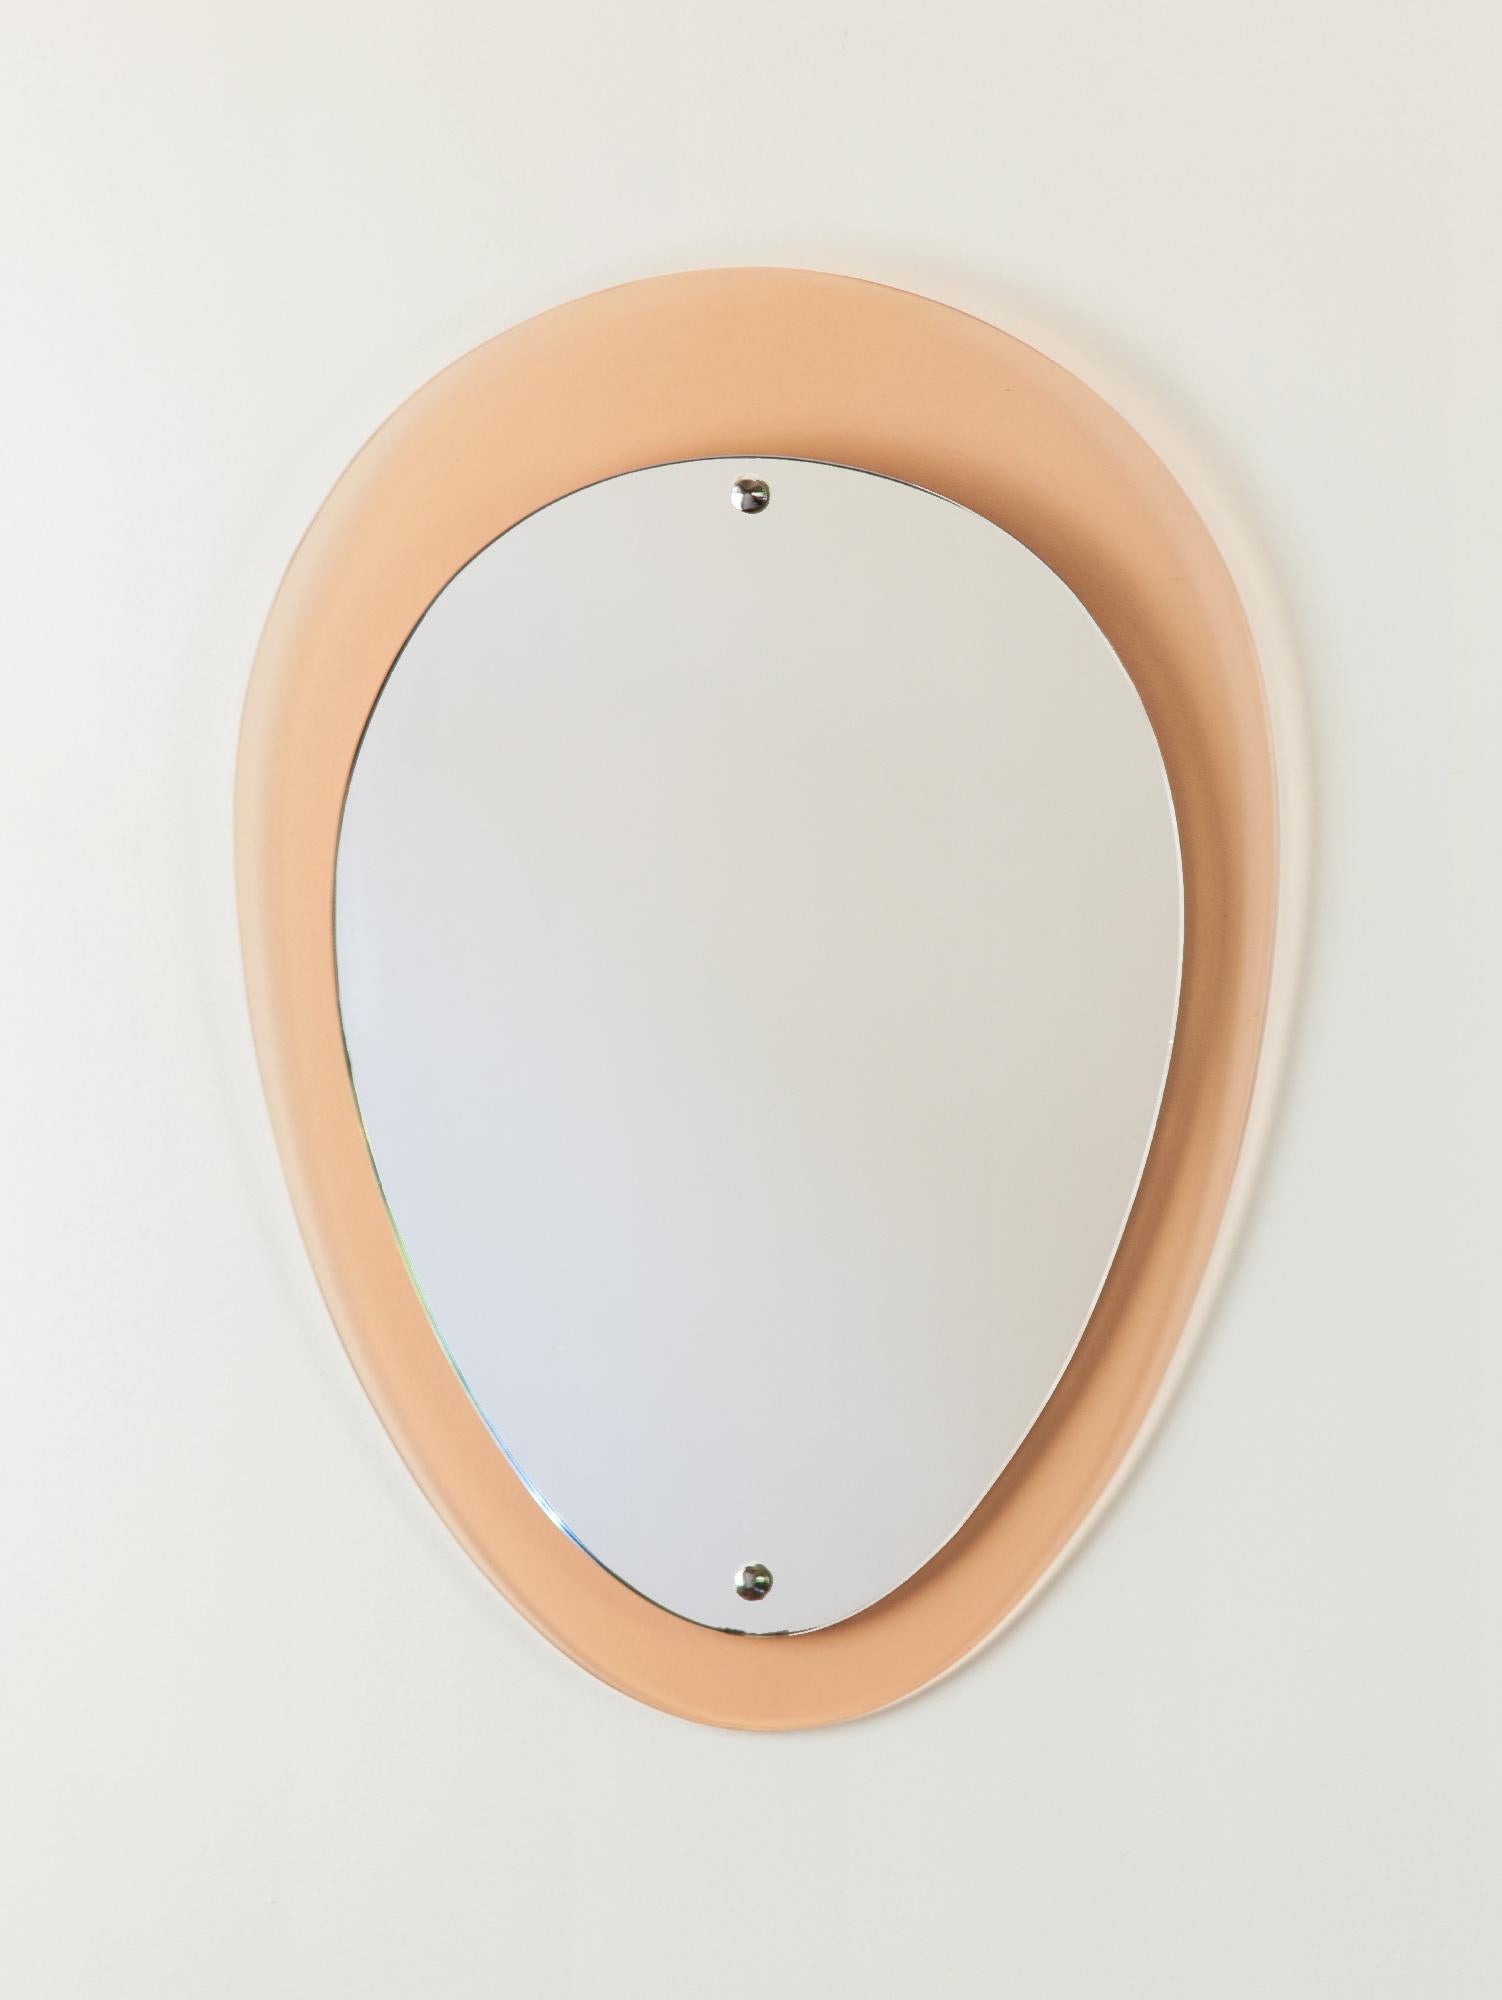 Lovely vintage rose colored glass mirror by Cristal Arte (attributed). The classic teardrop shape glass, with its peachy rose hue, has a lovely beveled edge. The mirror and glass are held by a steel frame on a wooden board with chrome capped screws.